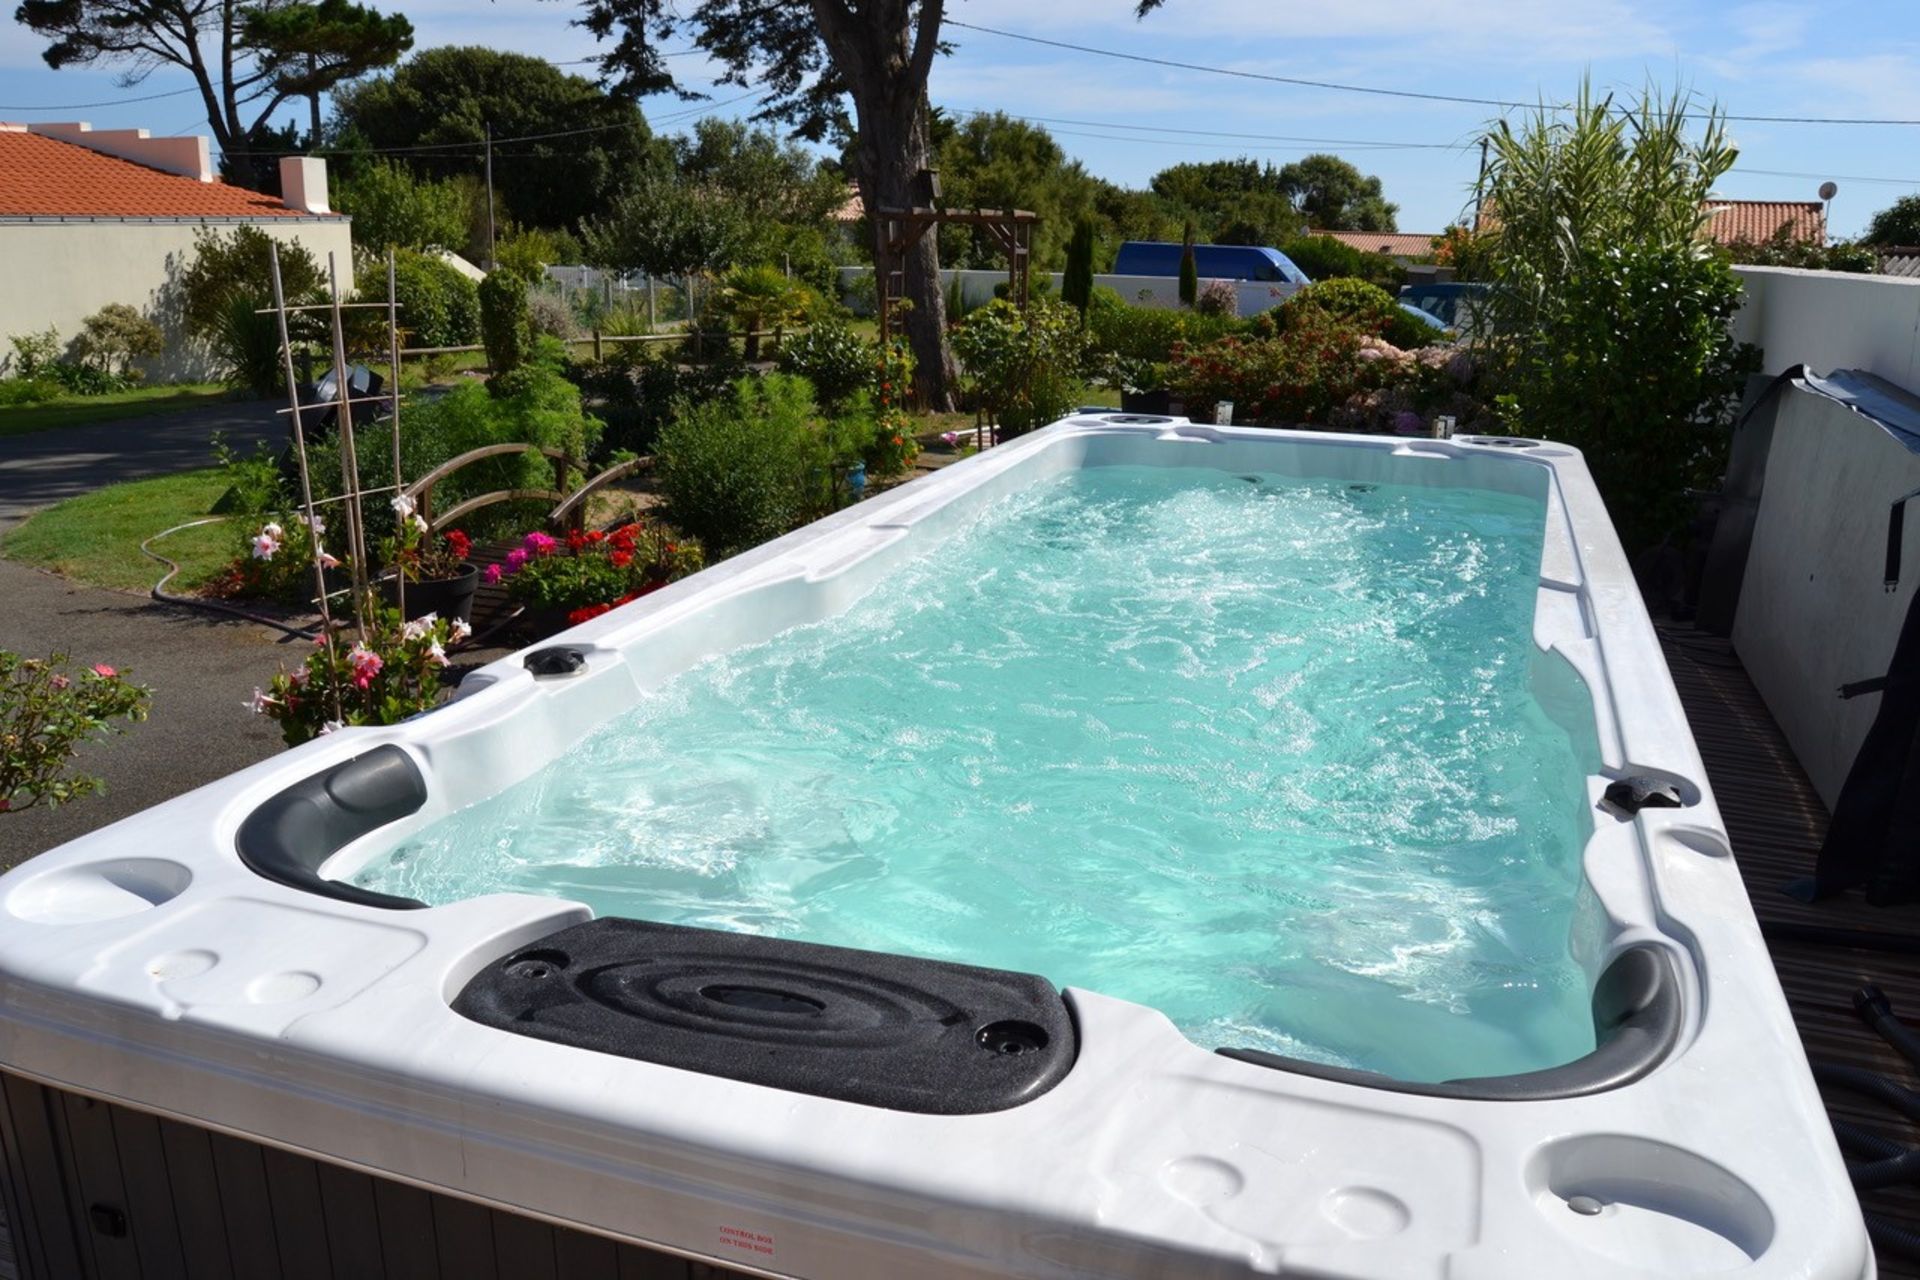 1 x Passion Spa Aquatic 2 Swim Spa - Brand New With Warranty - RRP: £20,500 - CL774 - Location: - Image 3 of 4